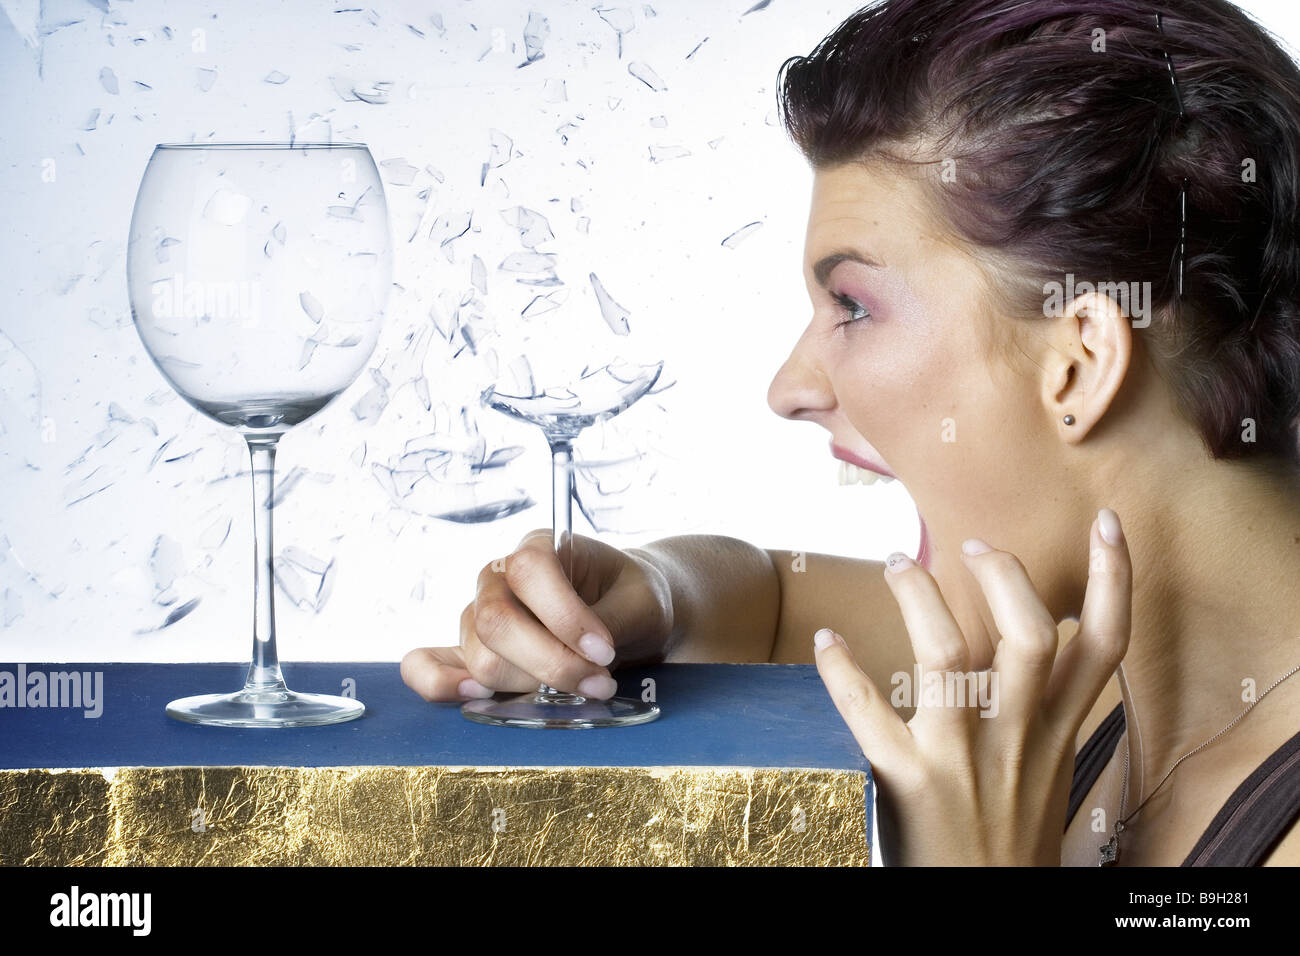 woman scream wine glasses glass shatters side-portrait people Sangerin  young facial expression hysteria voice sound chant sings Stock Photo - Alamy